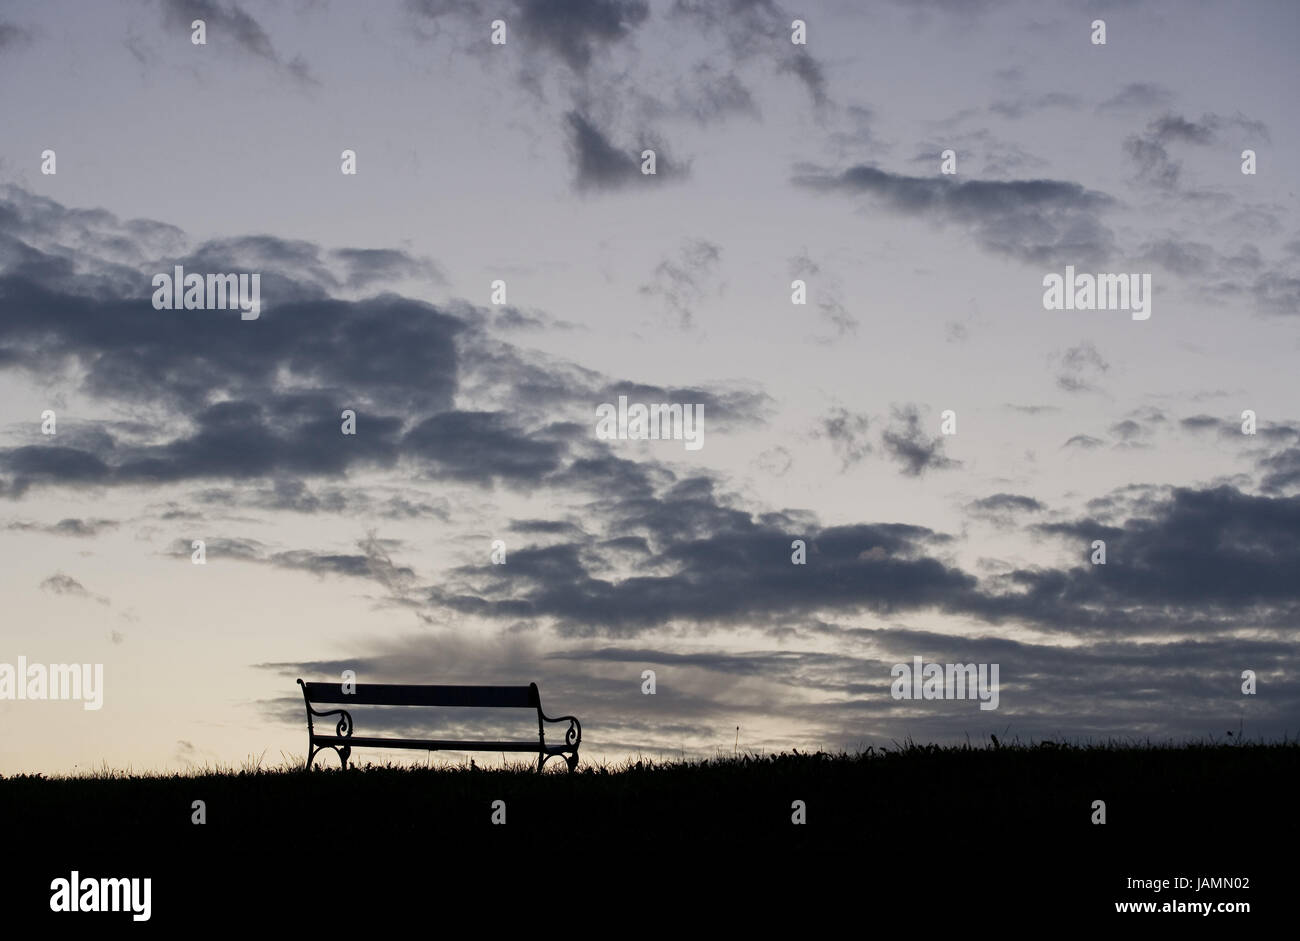 Meadow,park-bench,dusk,cloudy sky,nobody,saddle,loneliness,evening,tuning,evening tuning,sky,clouds,scenery,nature, Stock Photo